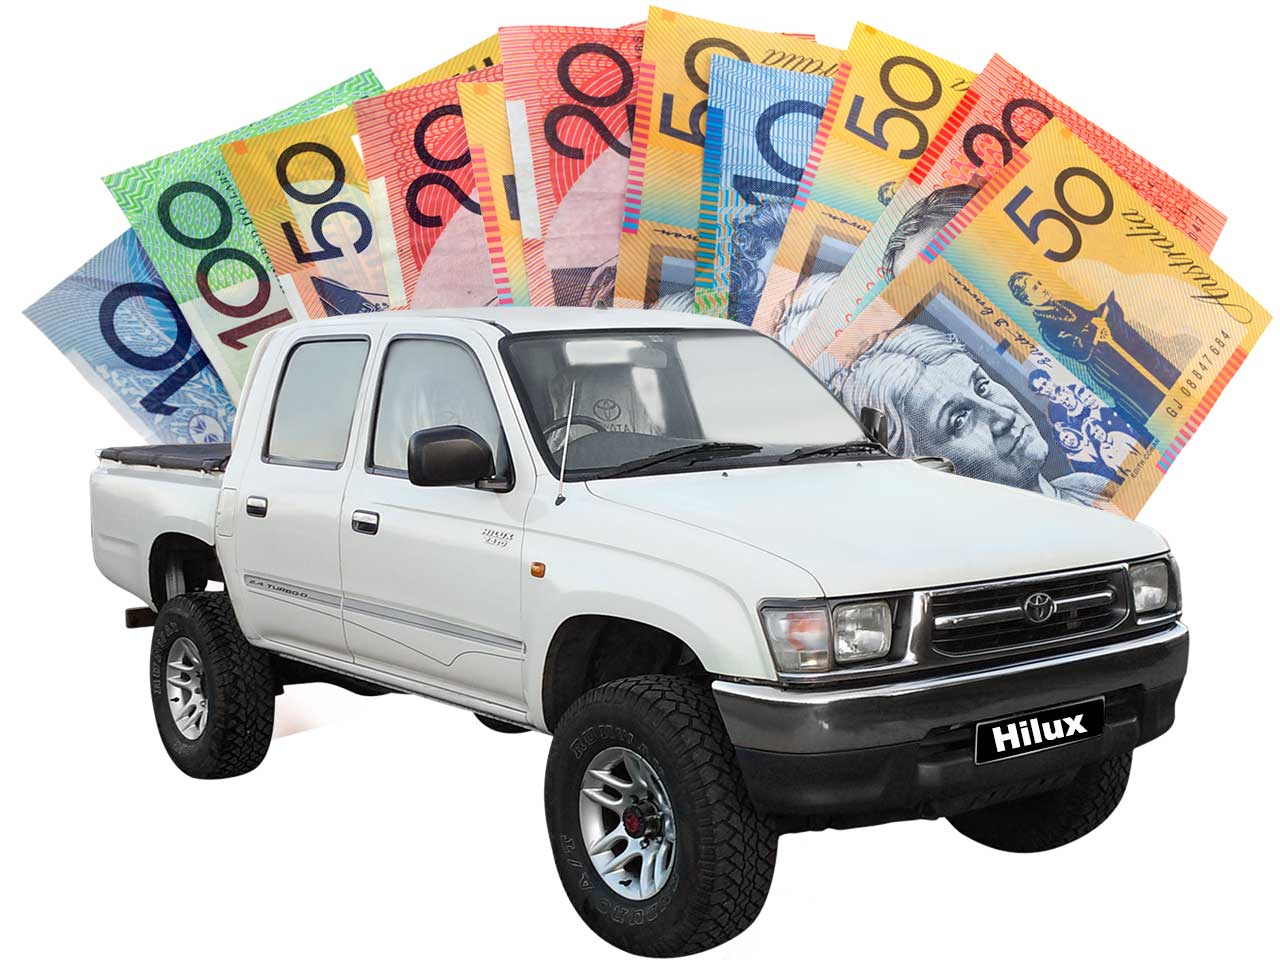 Junk Cars Agencies For Unwanted Car Removal Brisbane